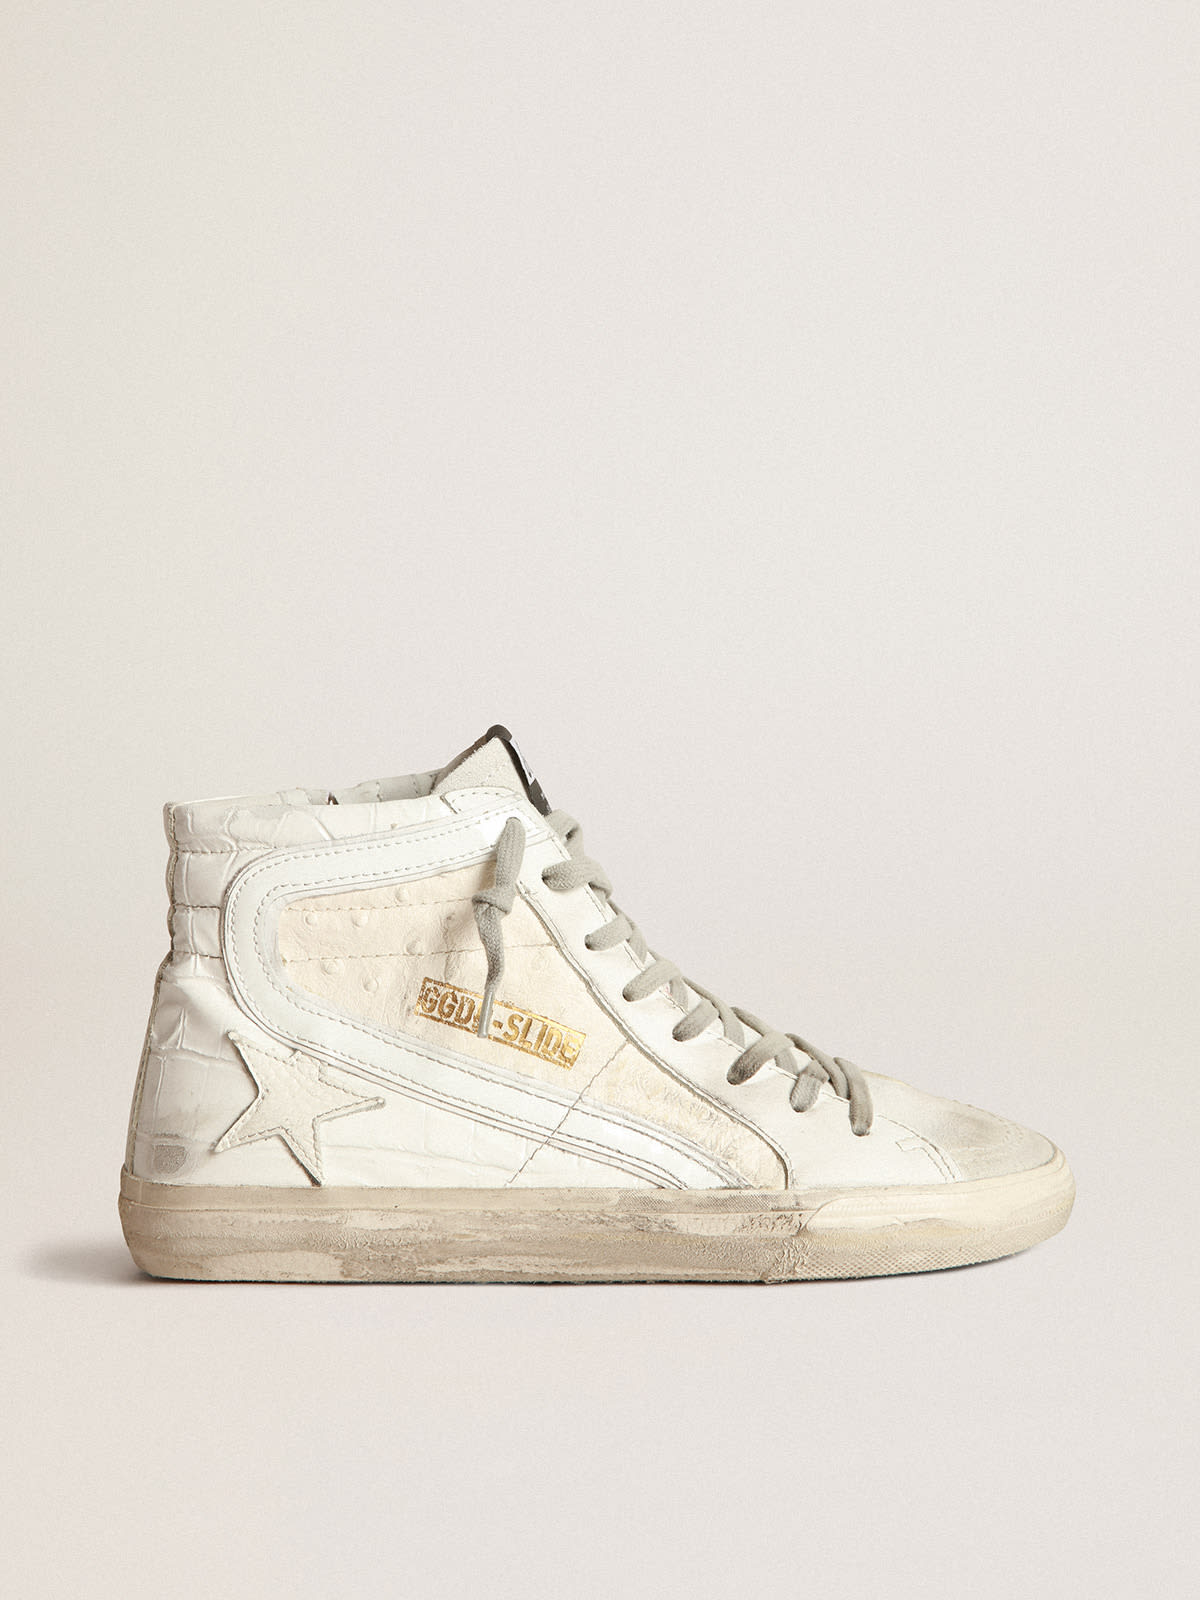 Golden Goose - White patchwork shades Slide sneakers in 